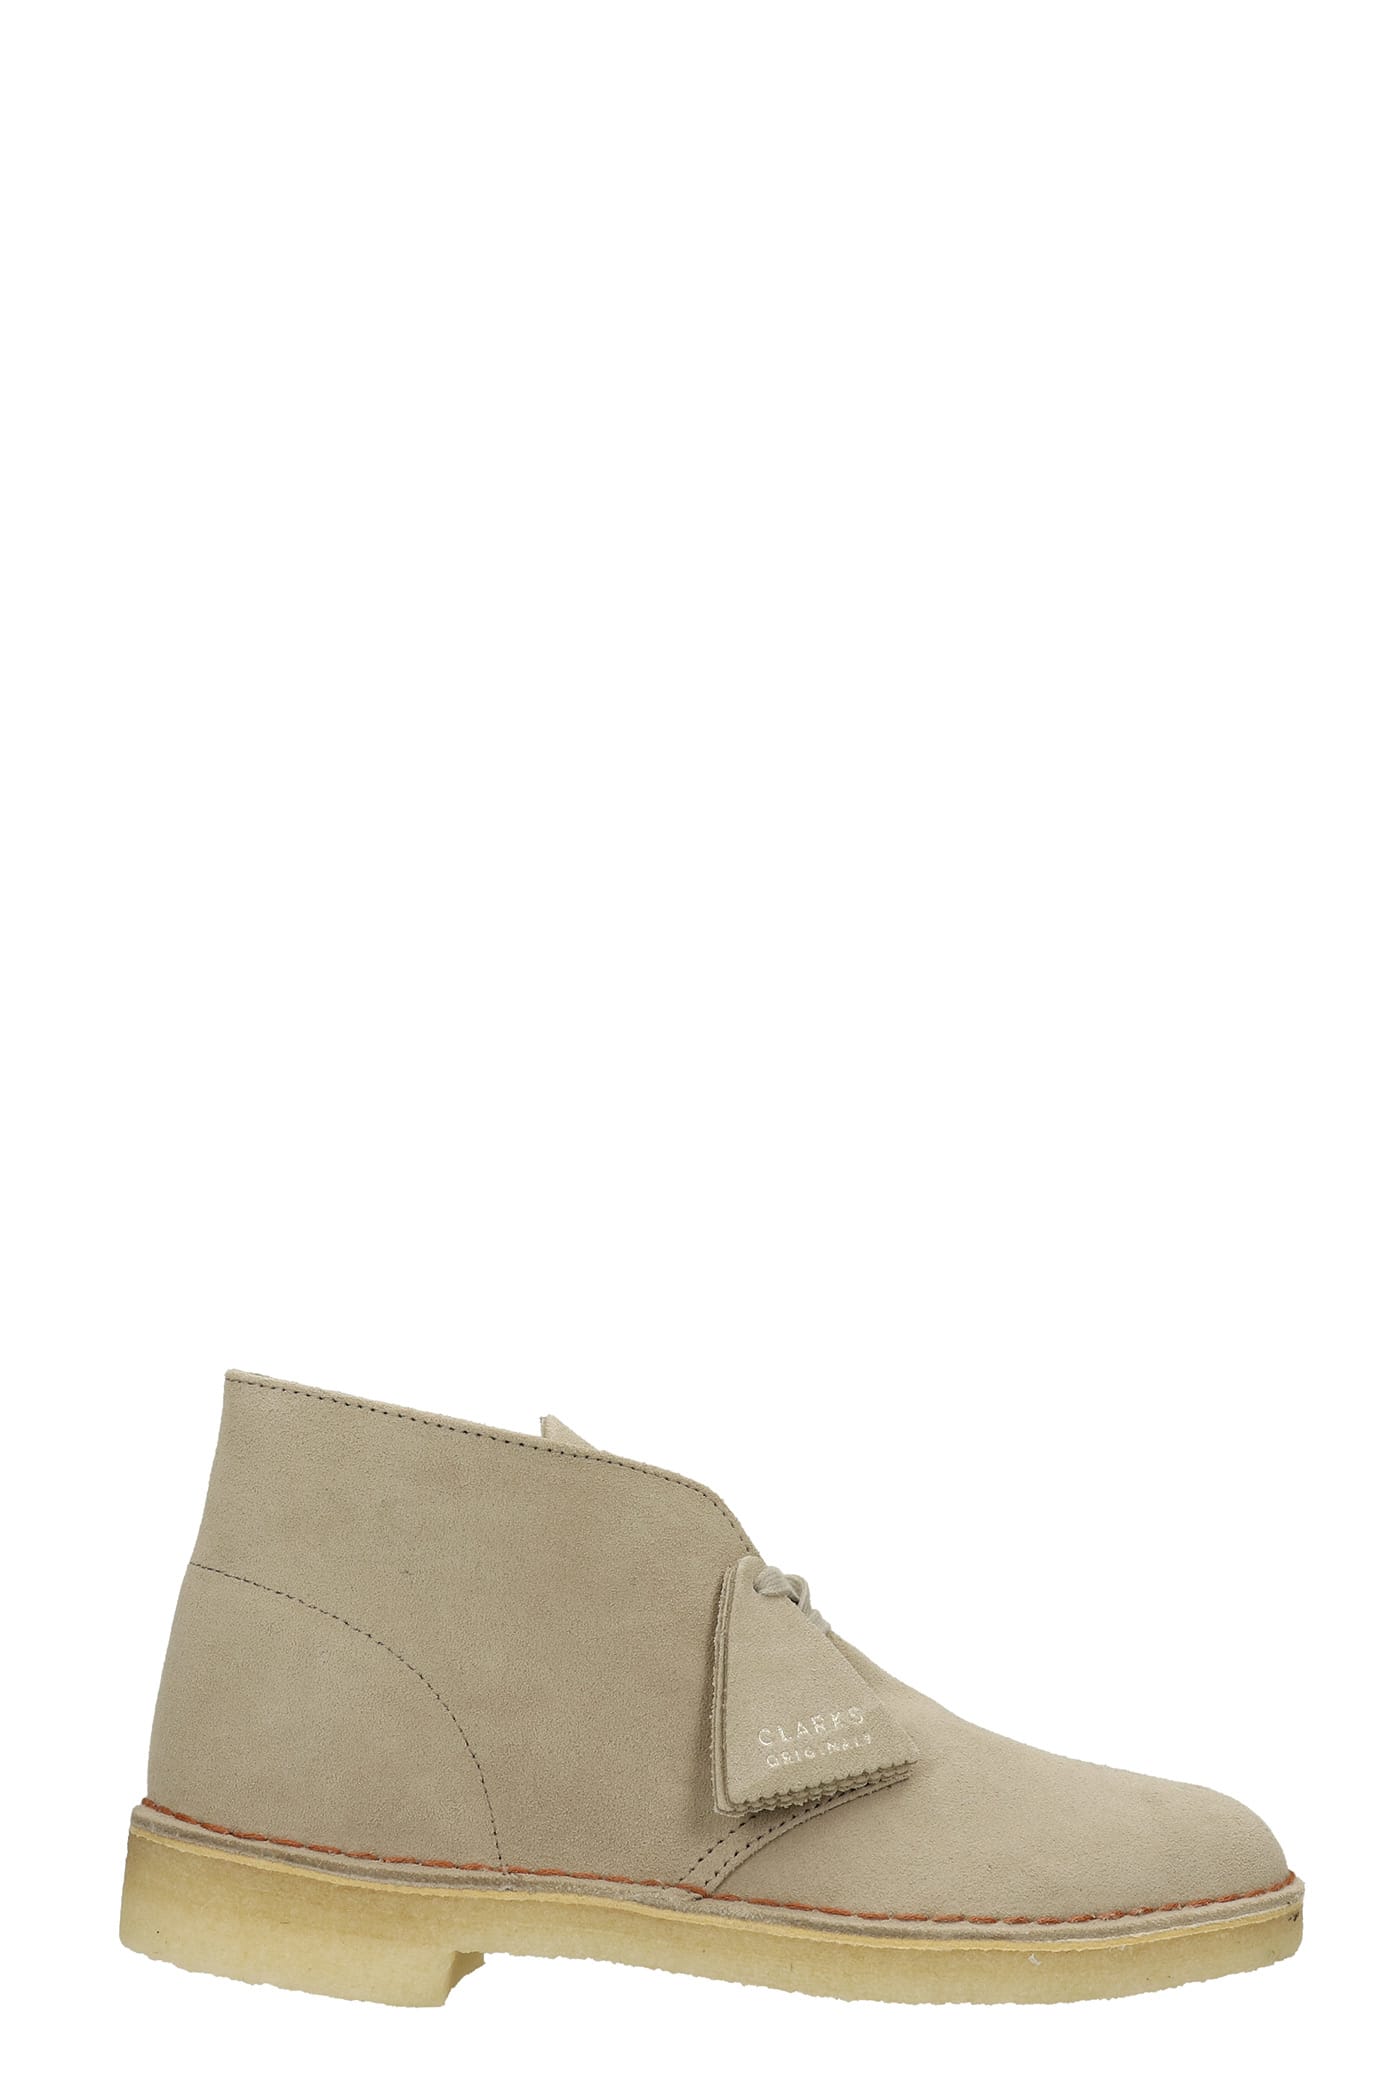 Clarks Desert Boot M Lace Up Shoes In Beige Suede